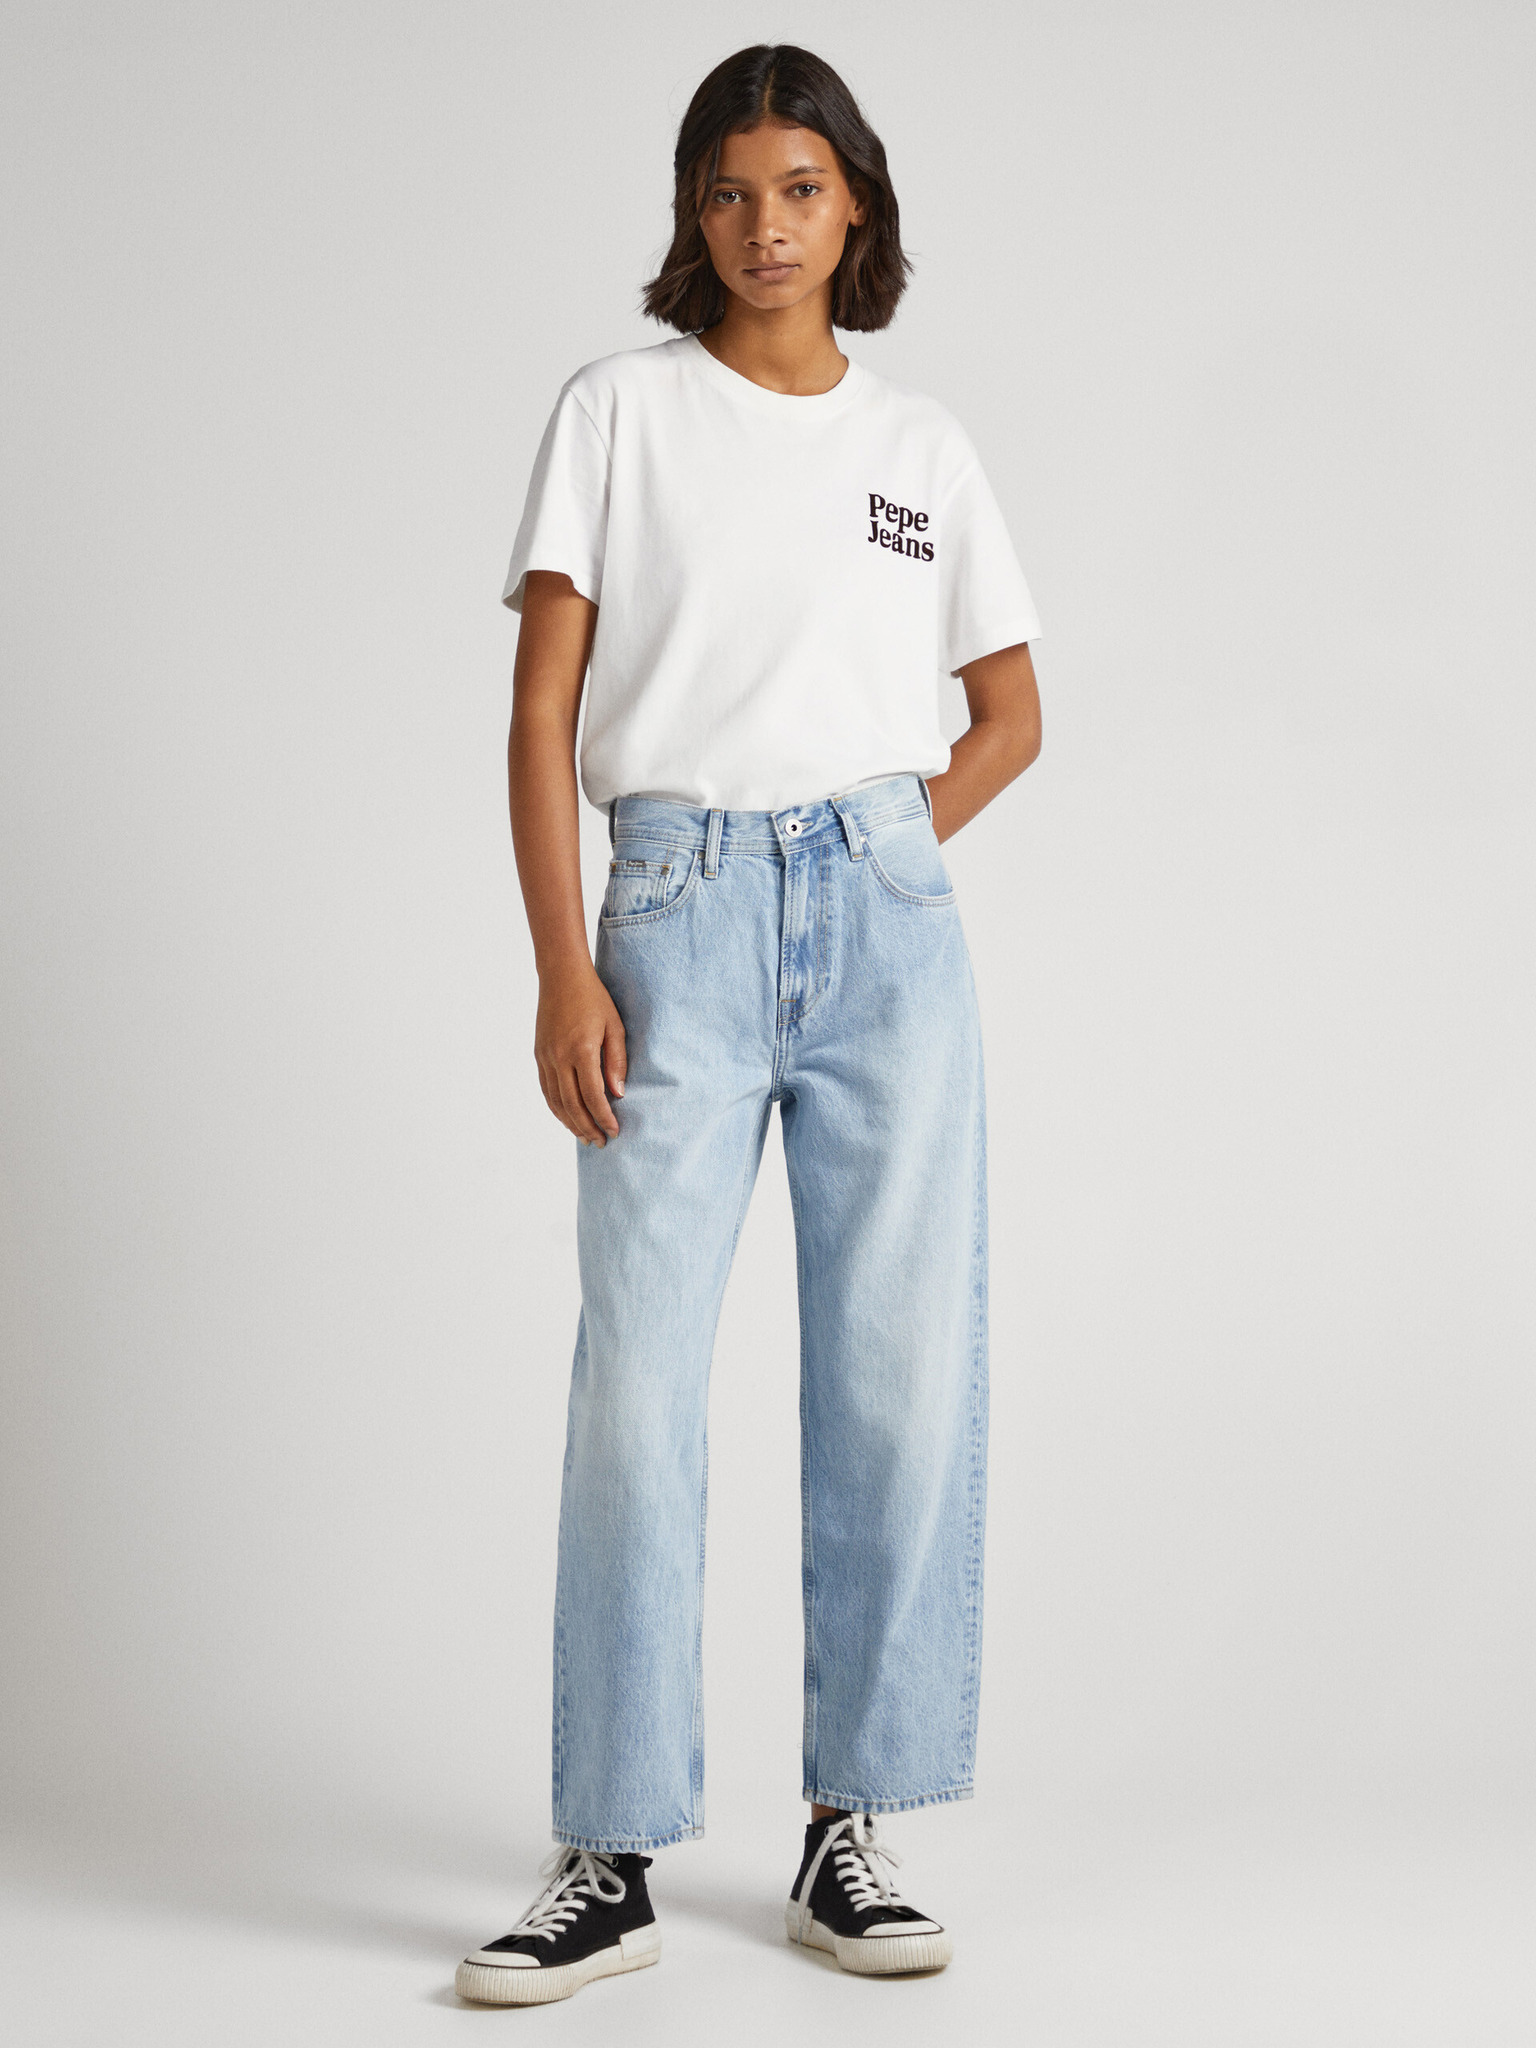 Pepe Jeans Jeans for women, Buy online